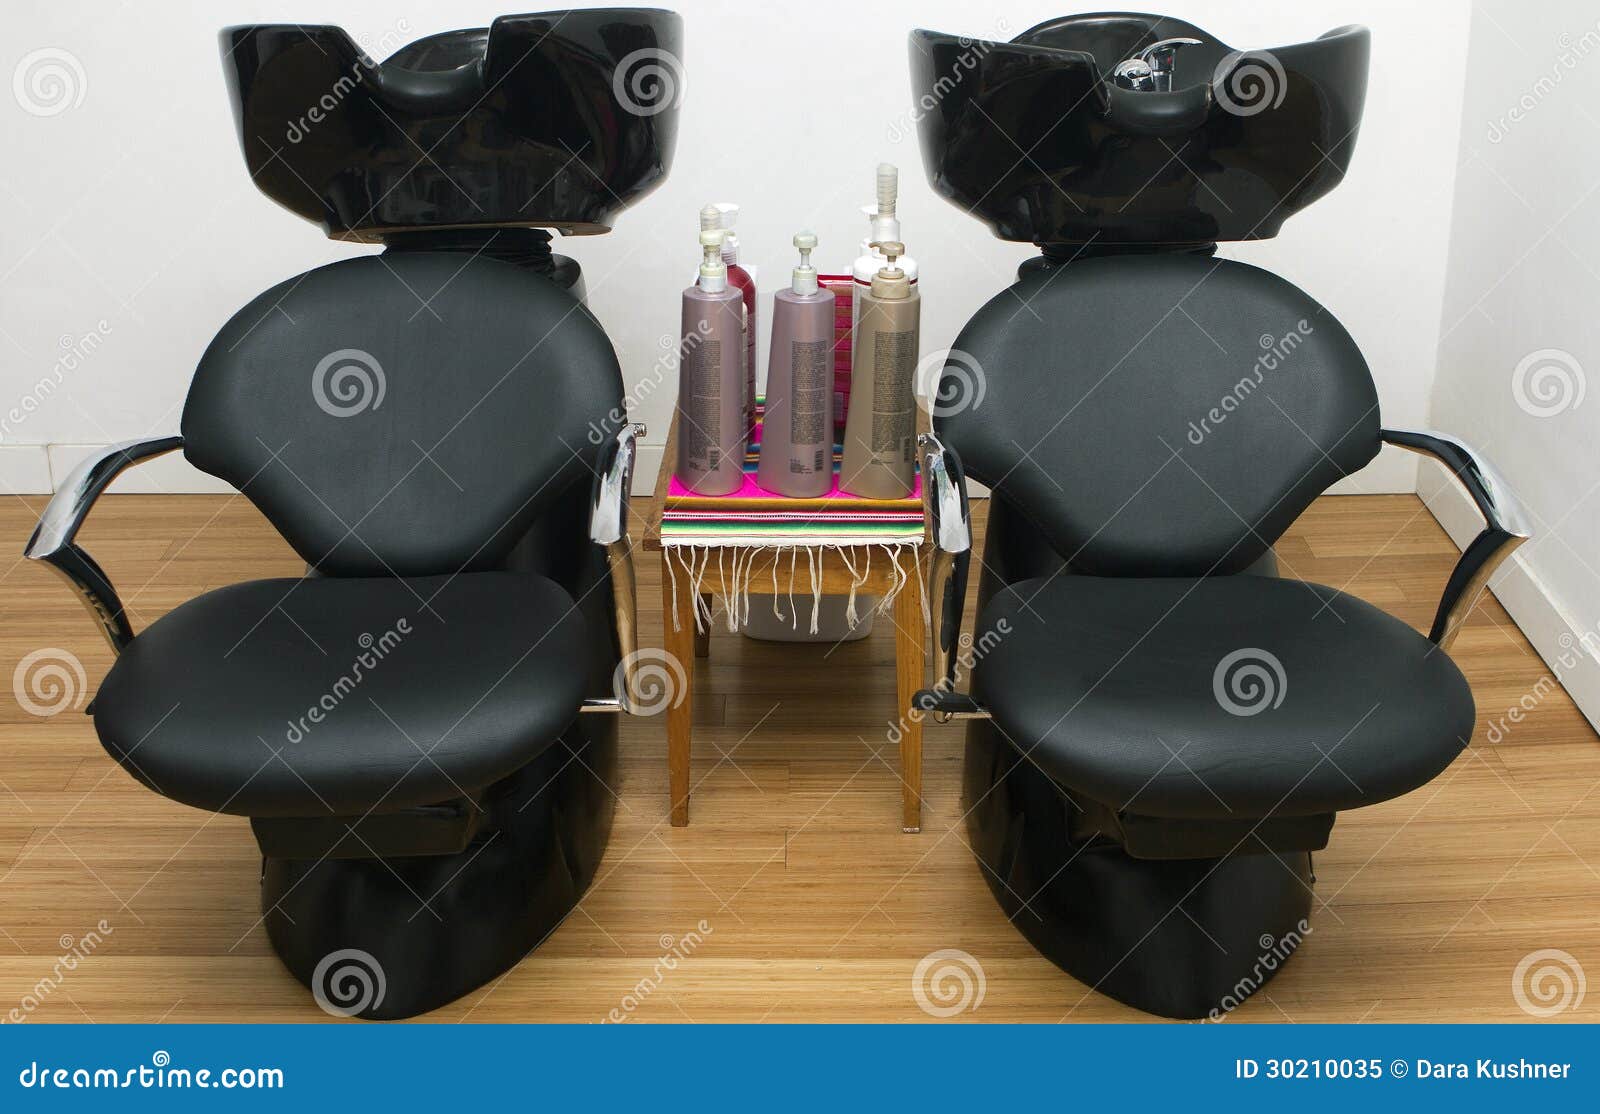 Hair Salon Sinks And Chairs Stock Image Image Of Shampoo Sink